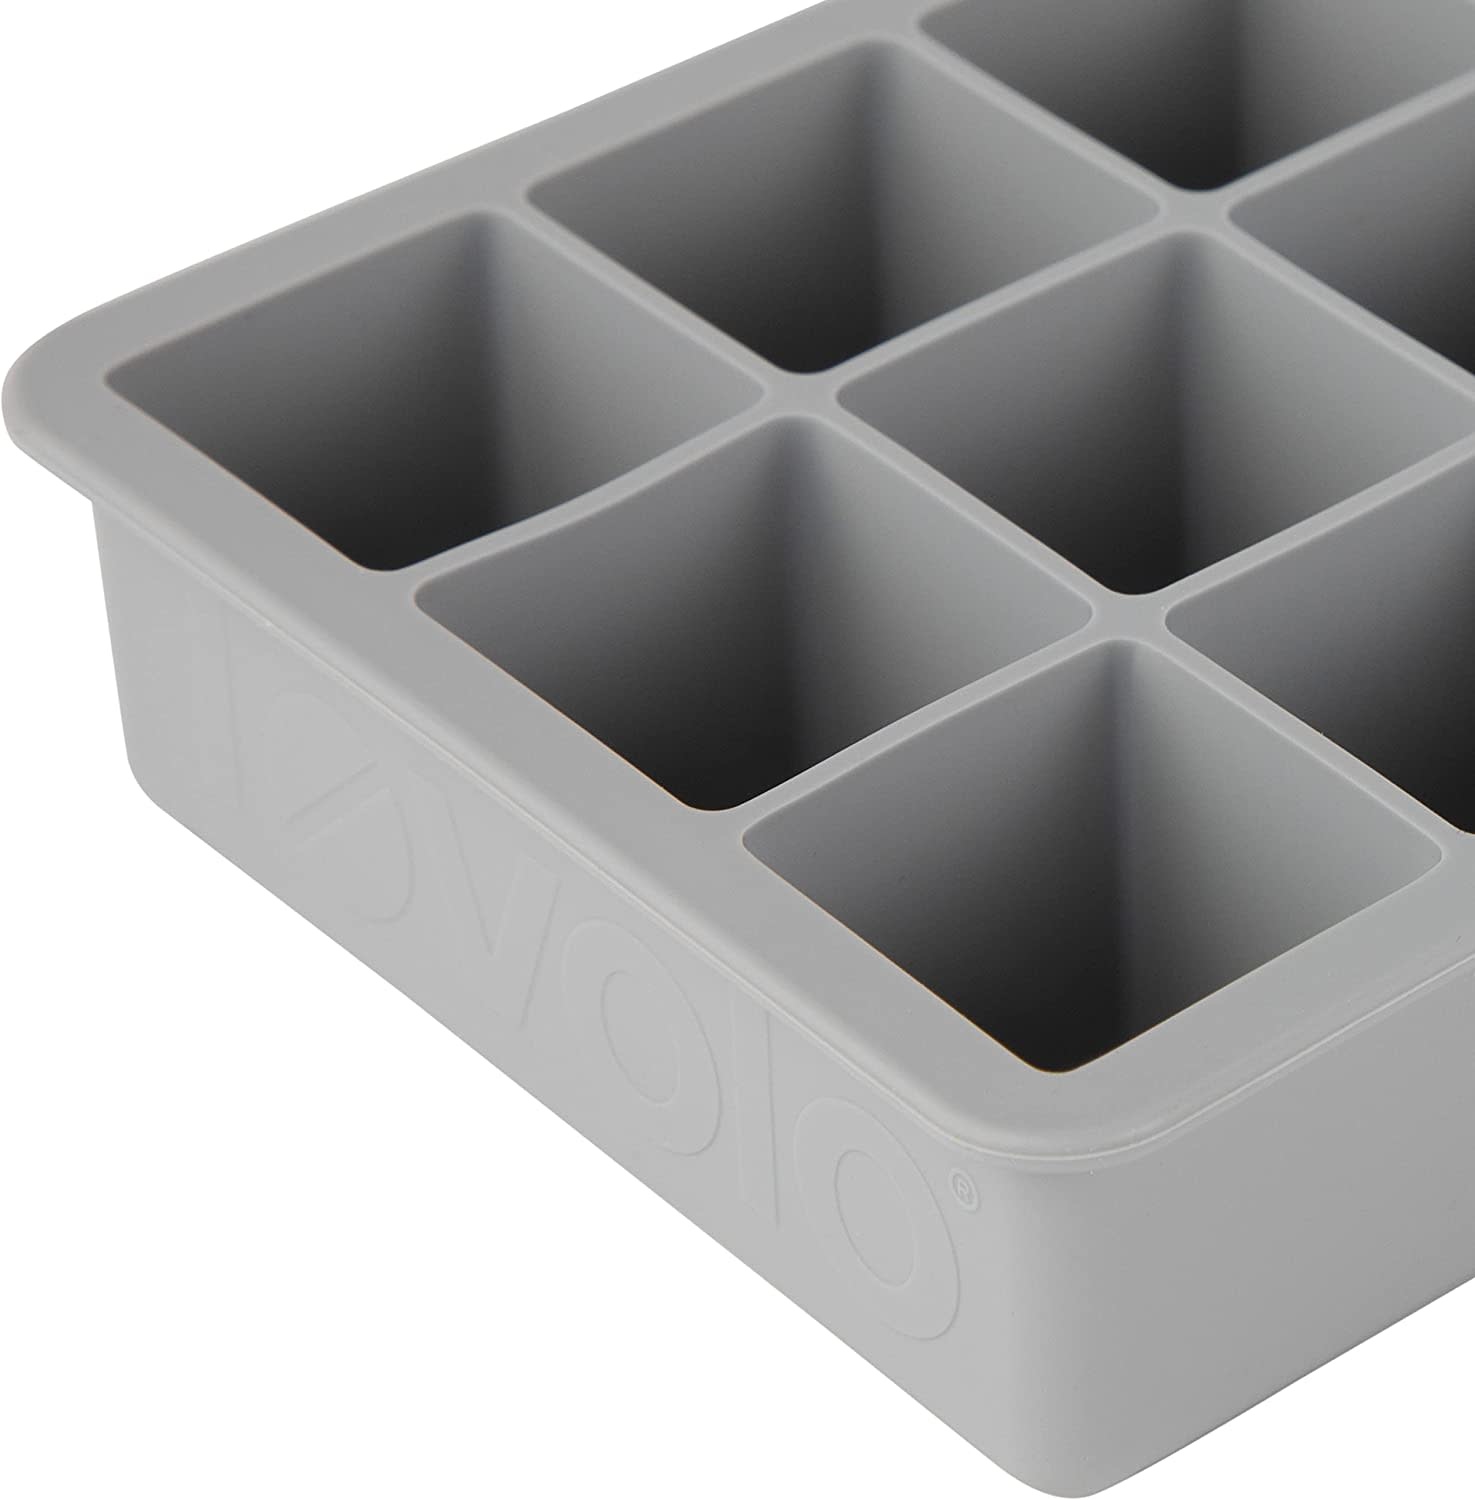 Tovolo Perfect Cube Oyster Gray Ice Tray, Set of 2